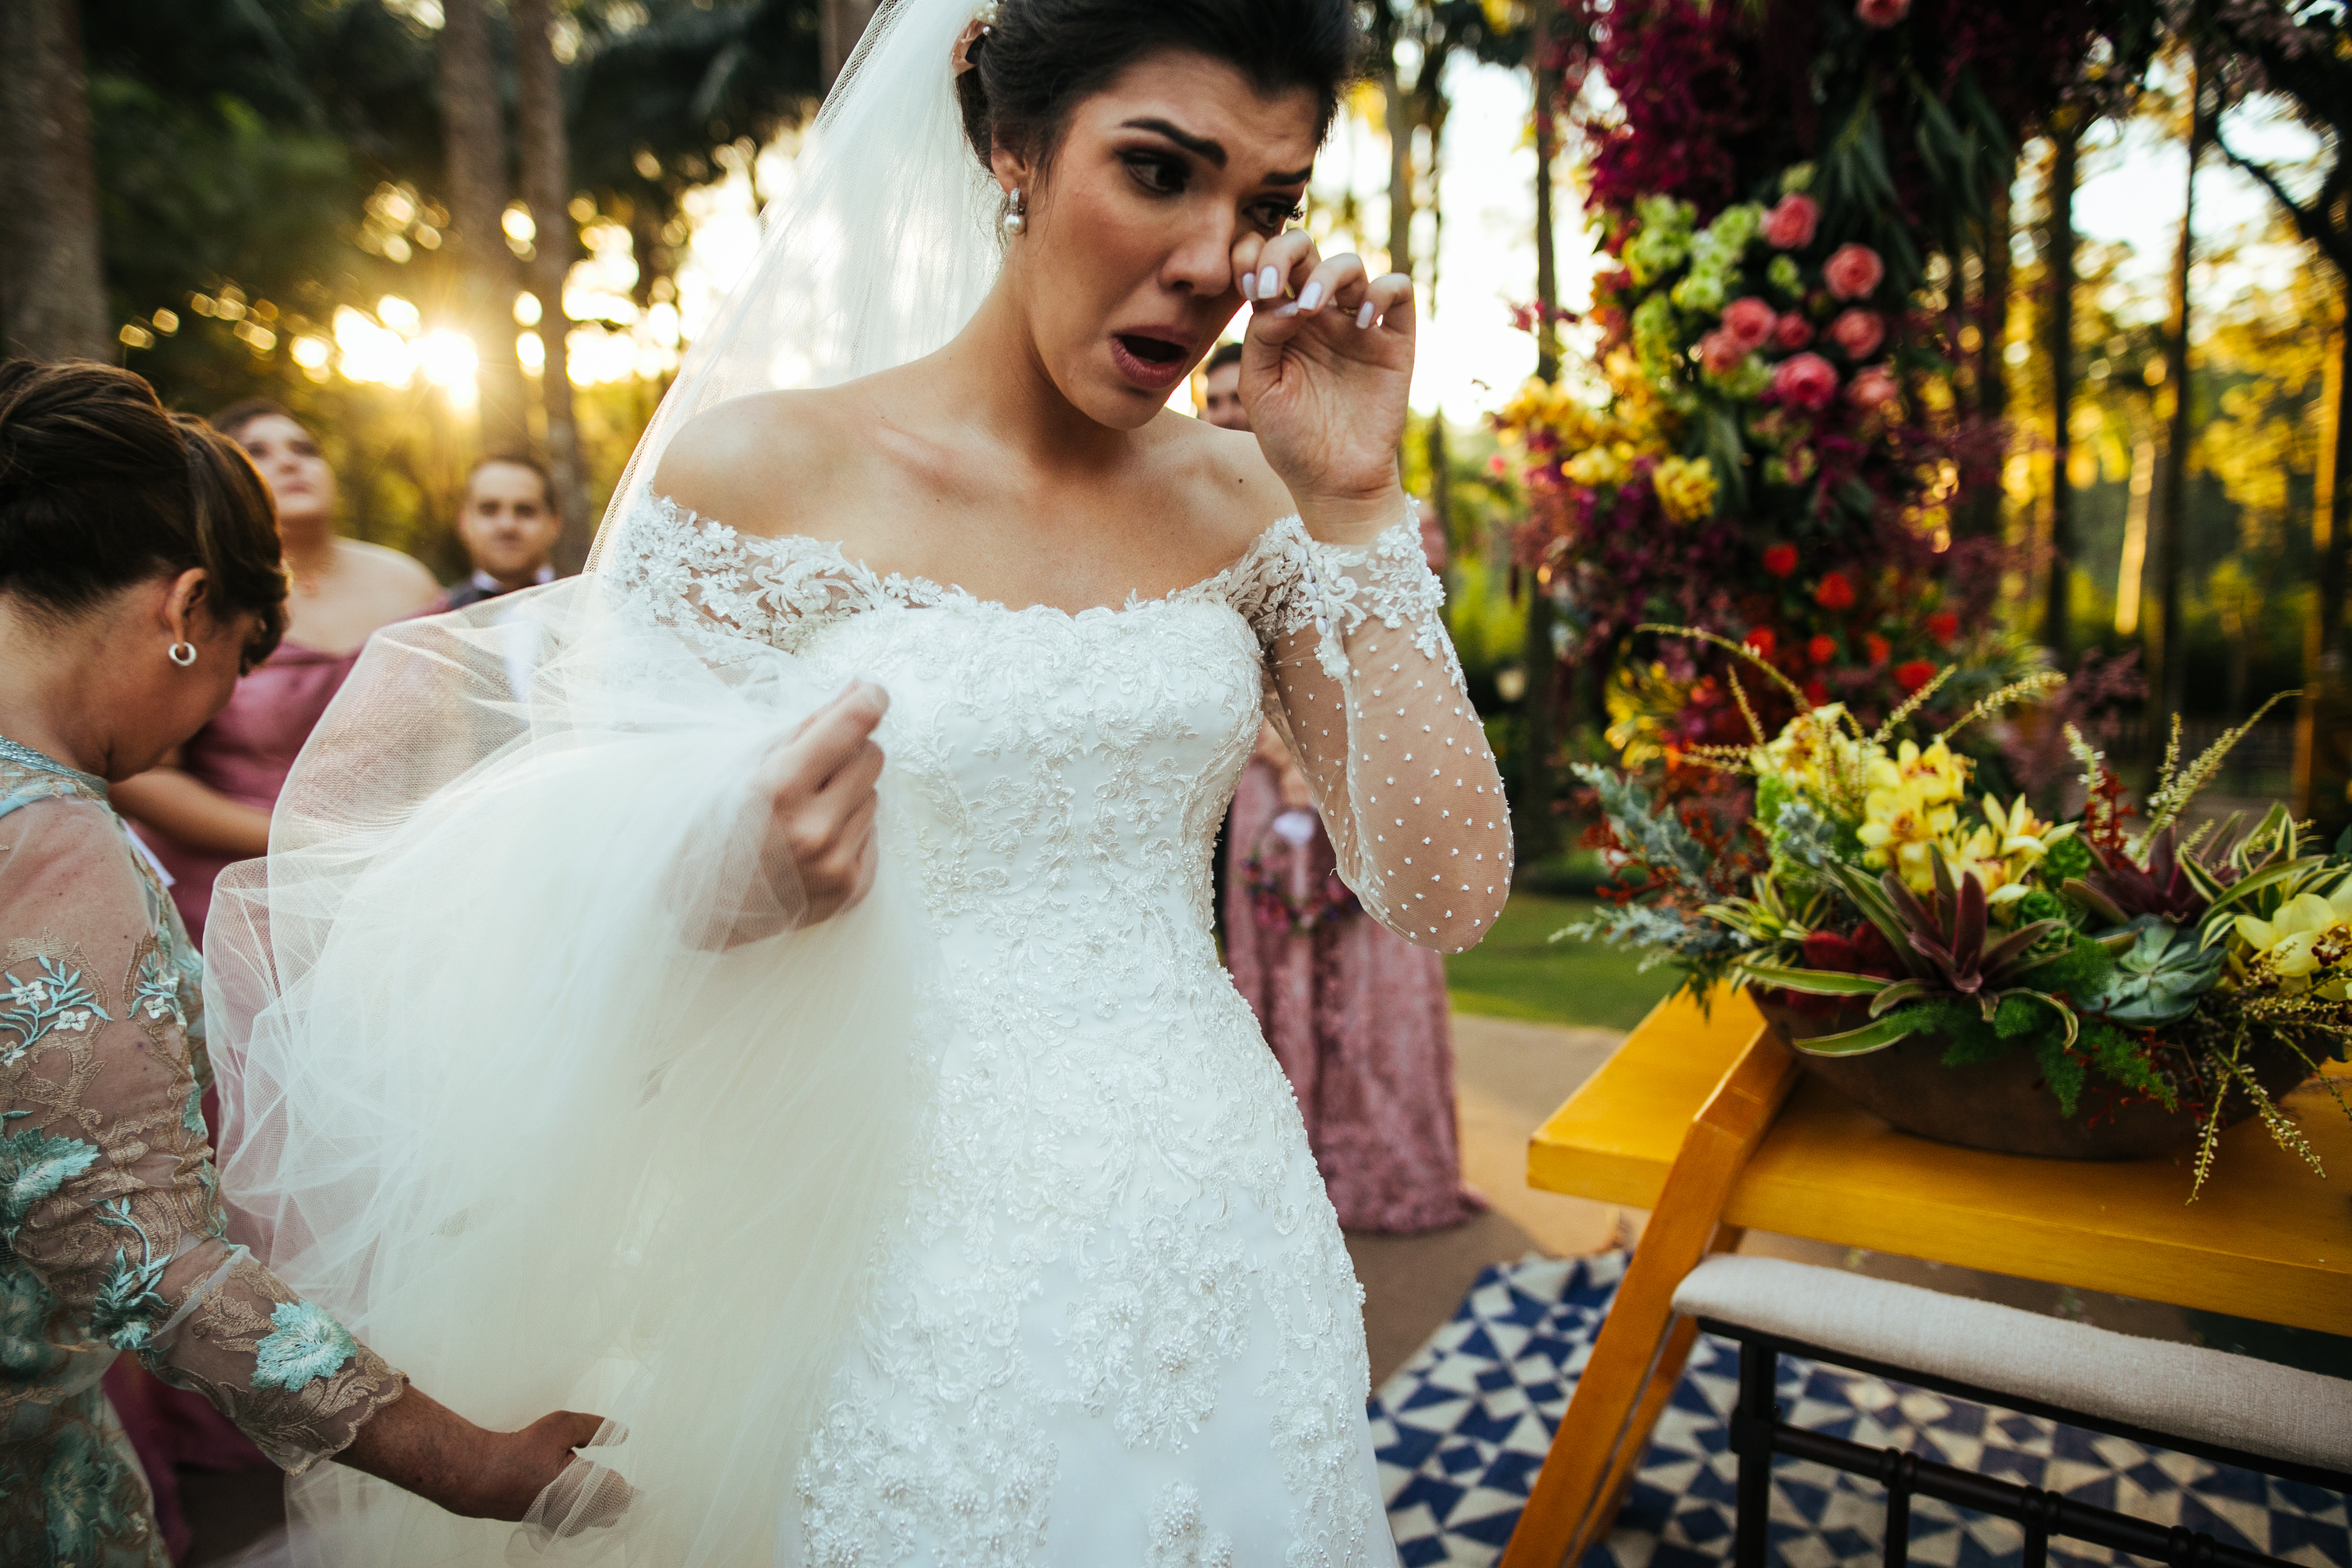 A bride crying at the altar | Source: Getty Images